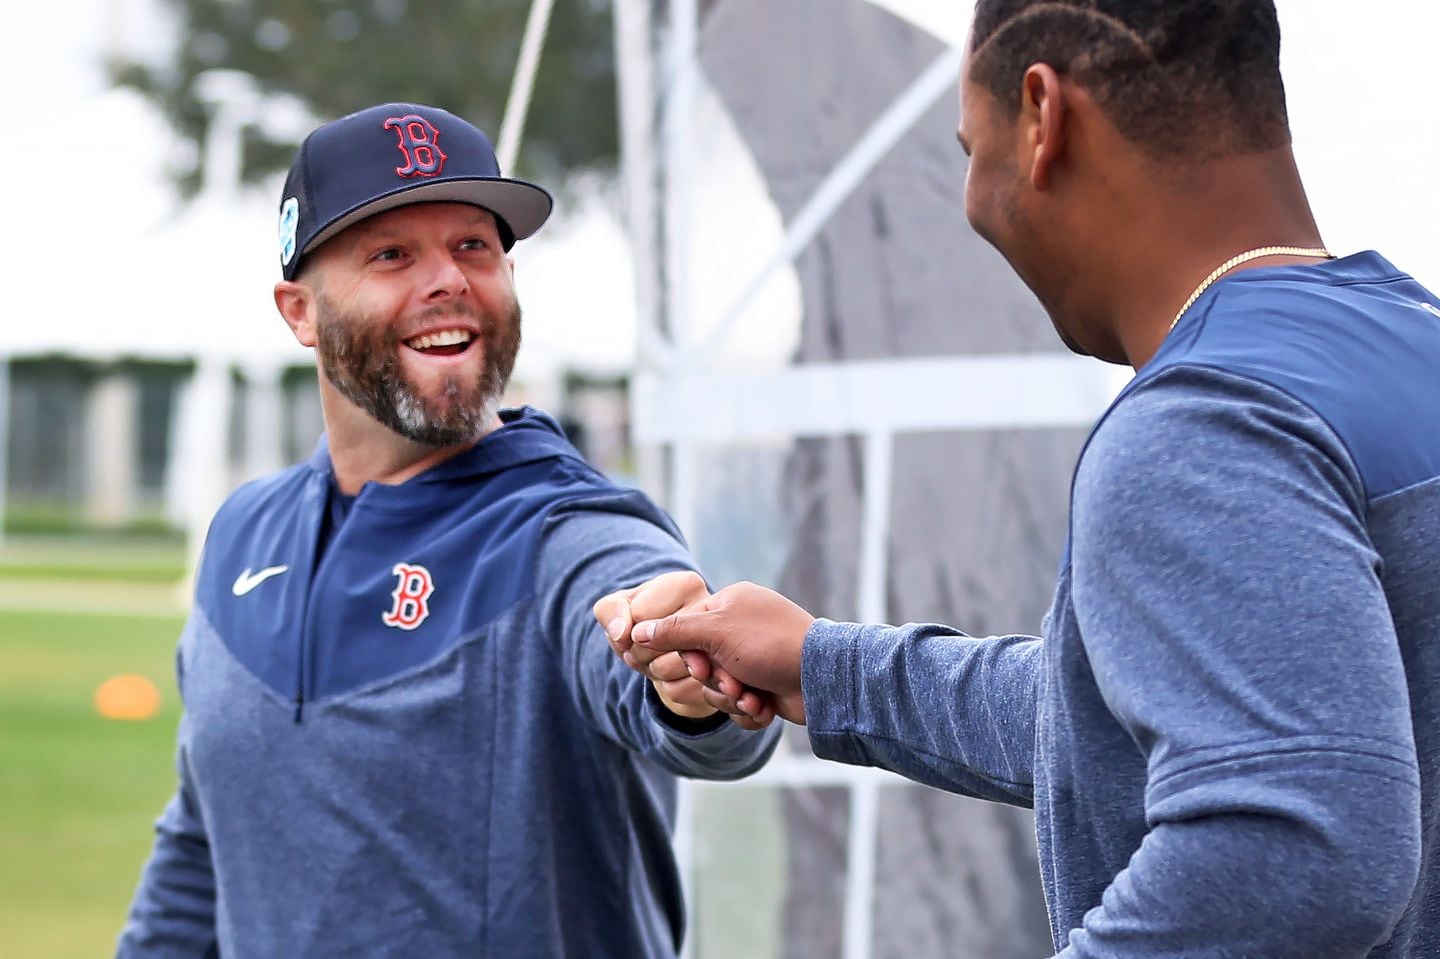 Dustin Pedroia has stayed involved with his former team, and he made an appearance at Fenway South this spring.